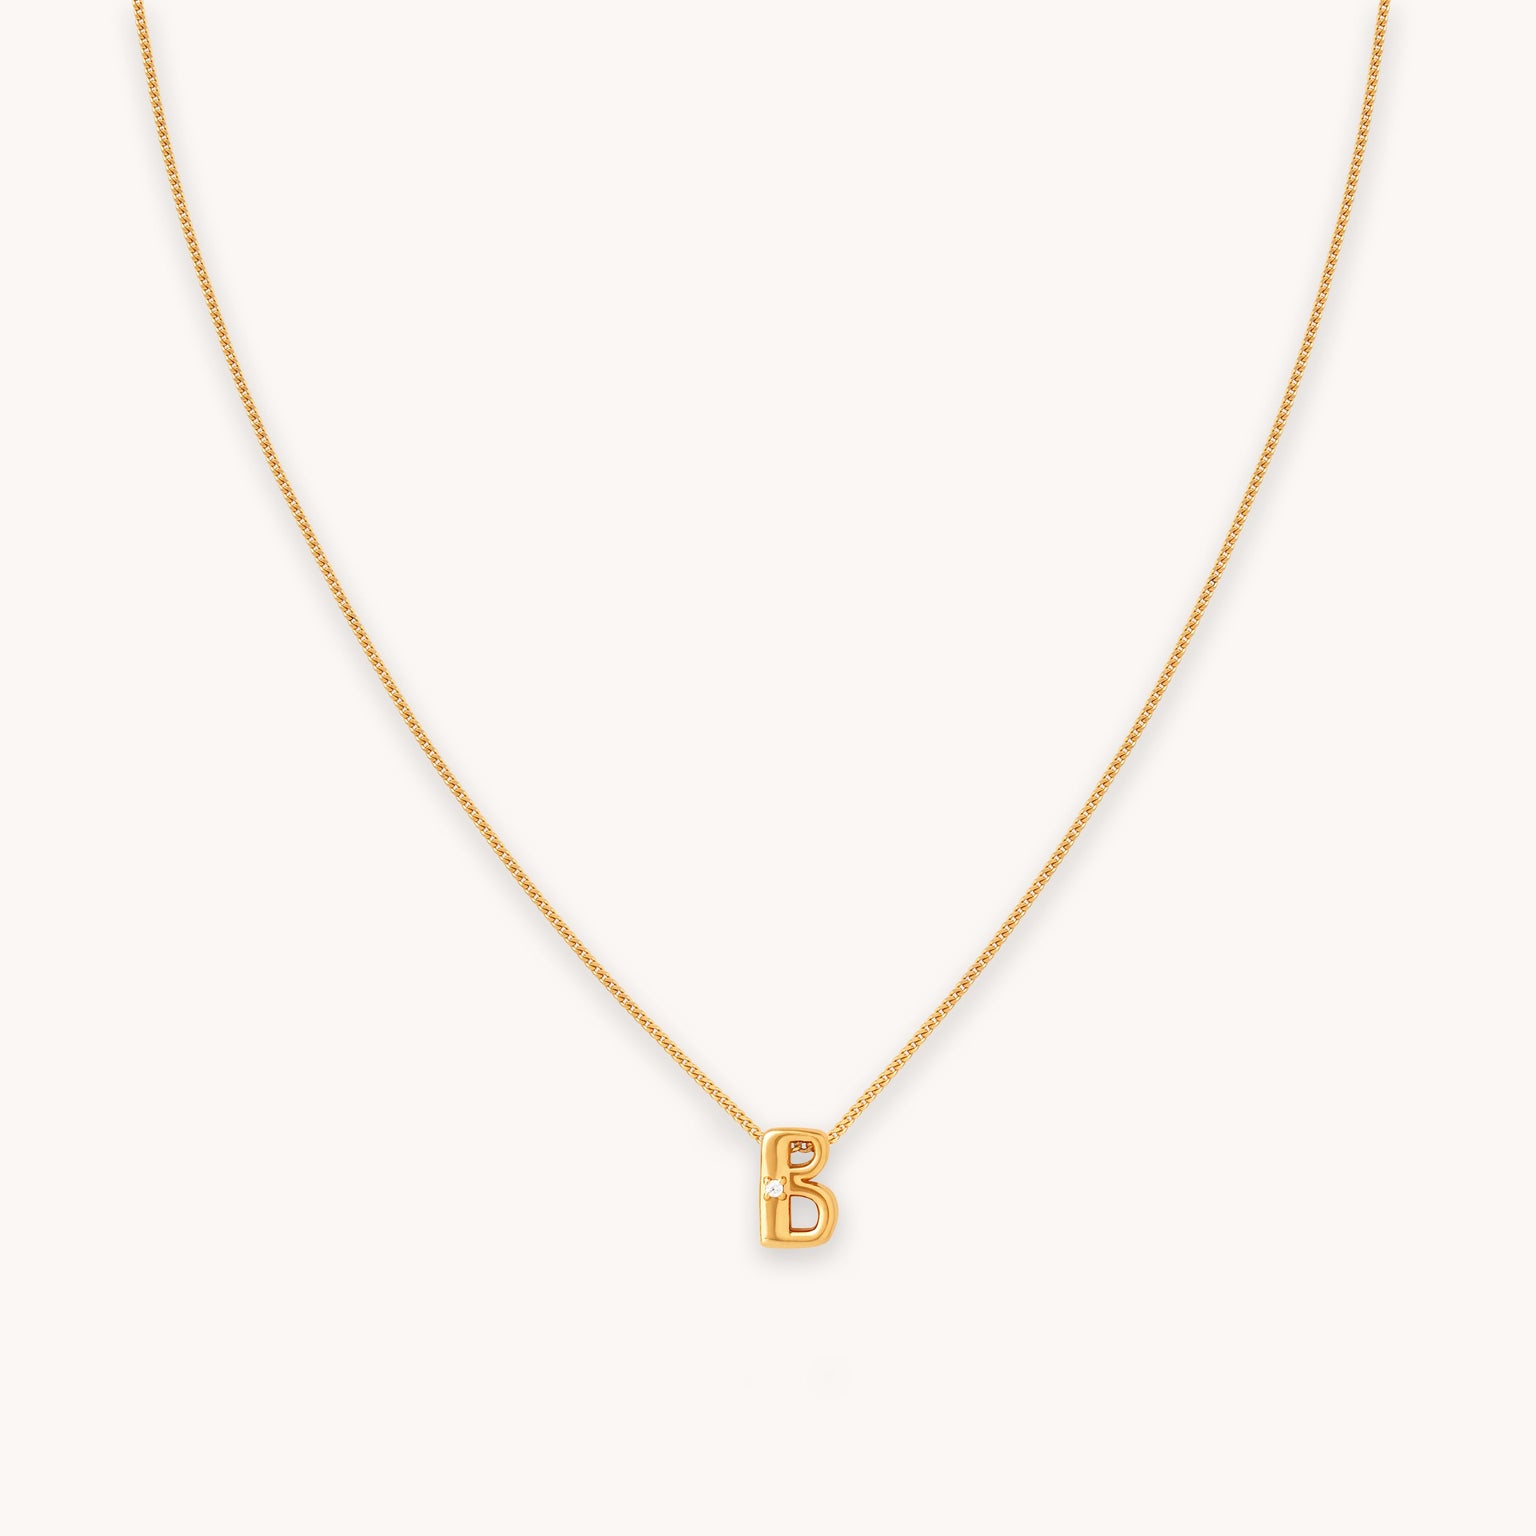 B Initial Pendant Necklace in Gold